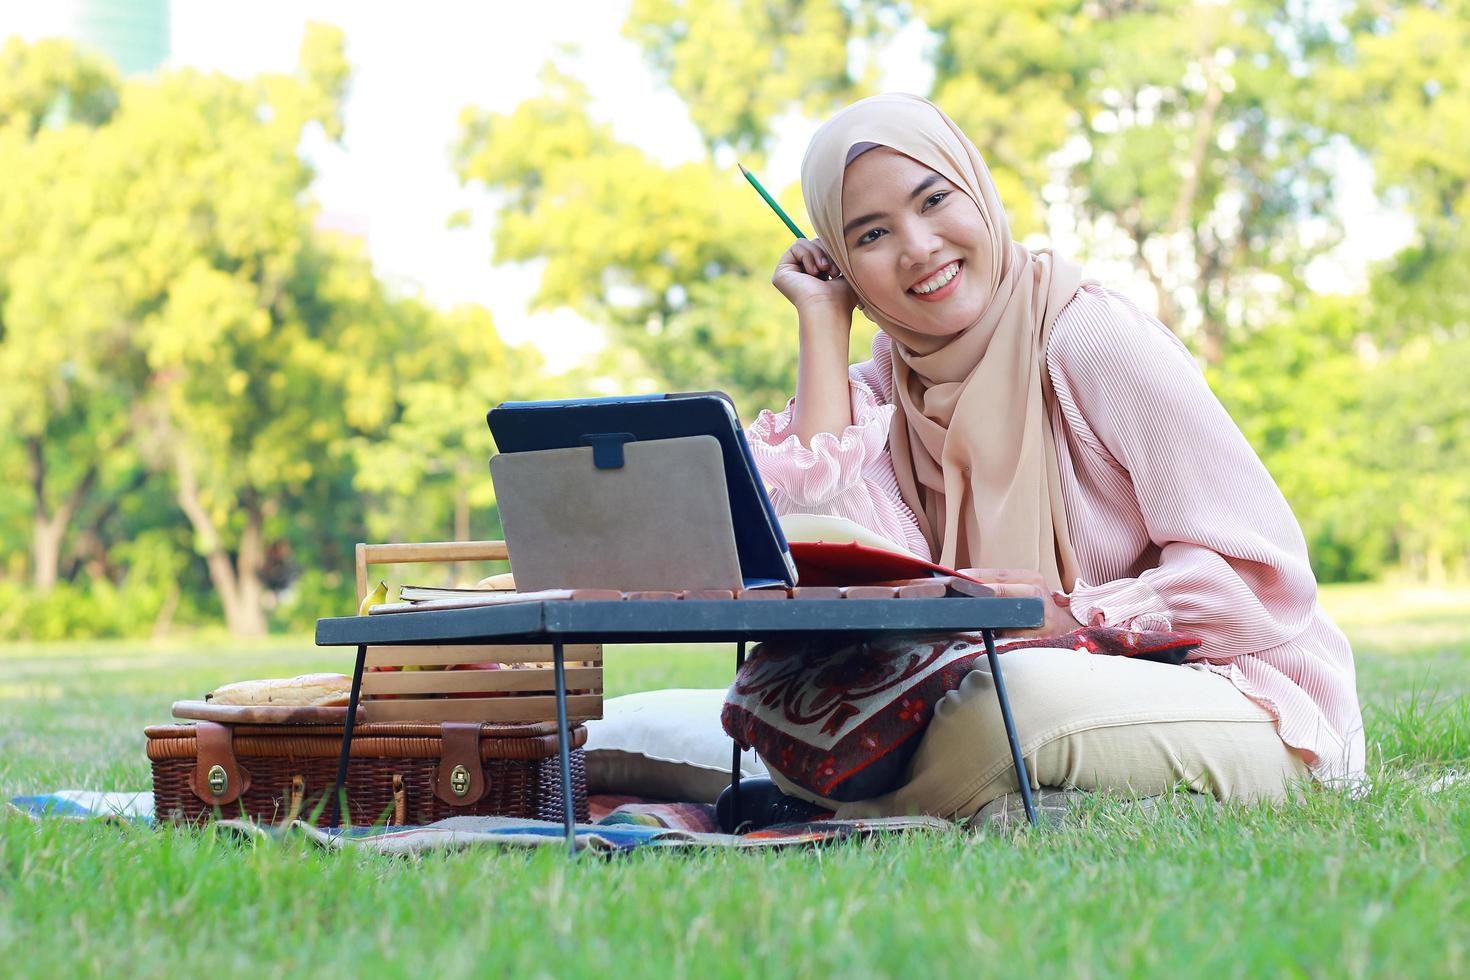 Beautiful Muslim girl sitting happily in the park. Muslim woman smiling in garden lawn. Lifestyle concept of a  confident modern woman photo